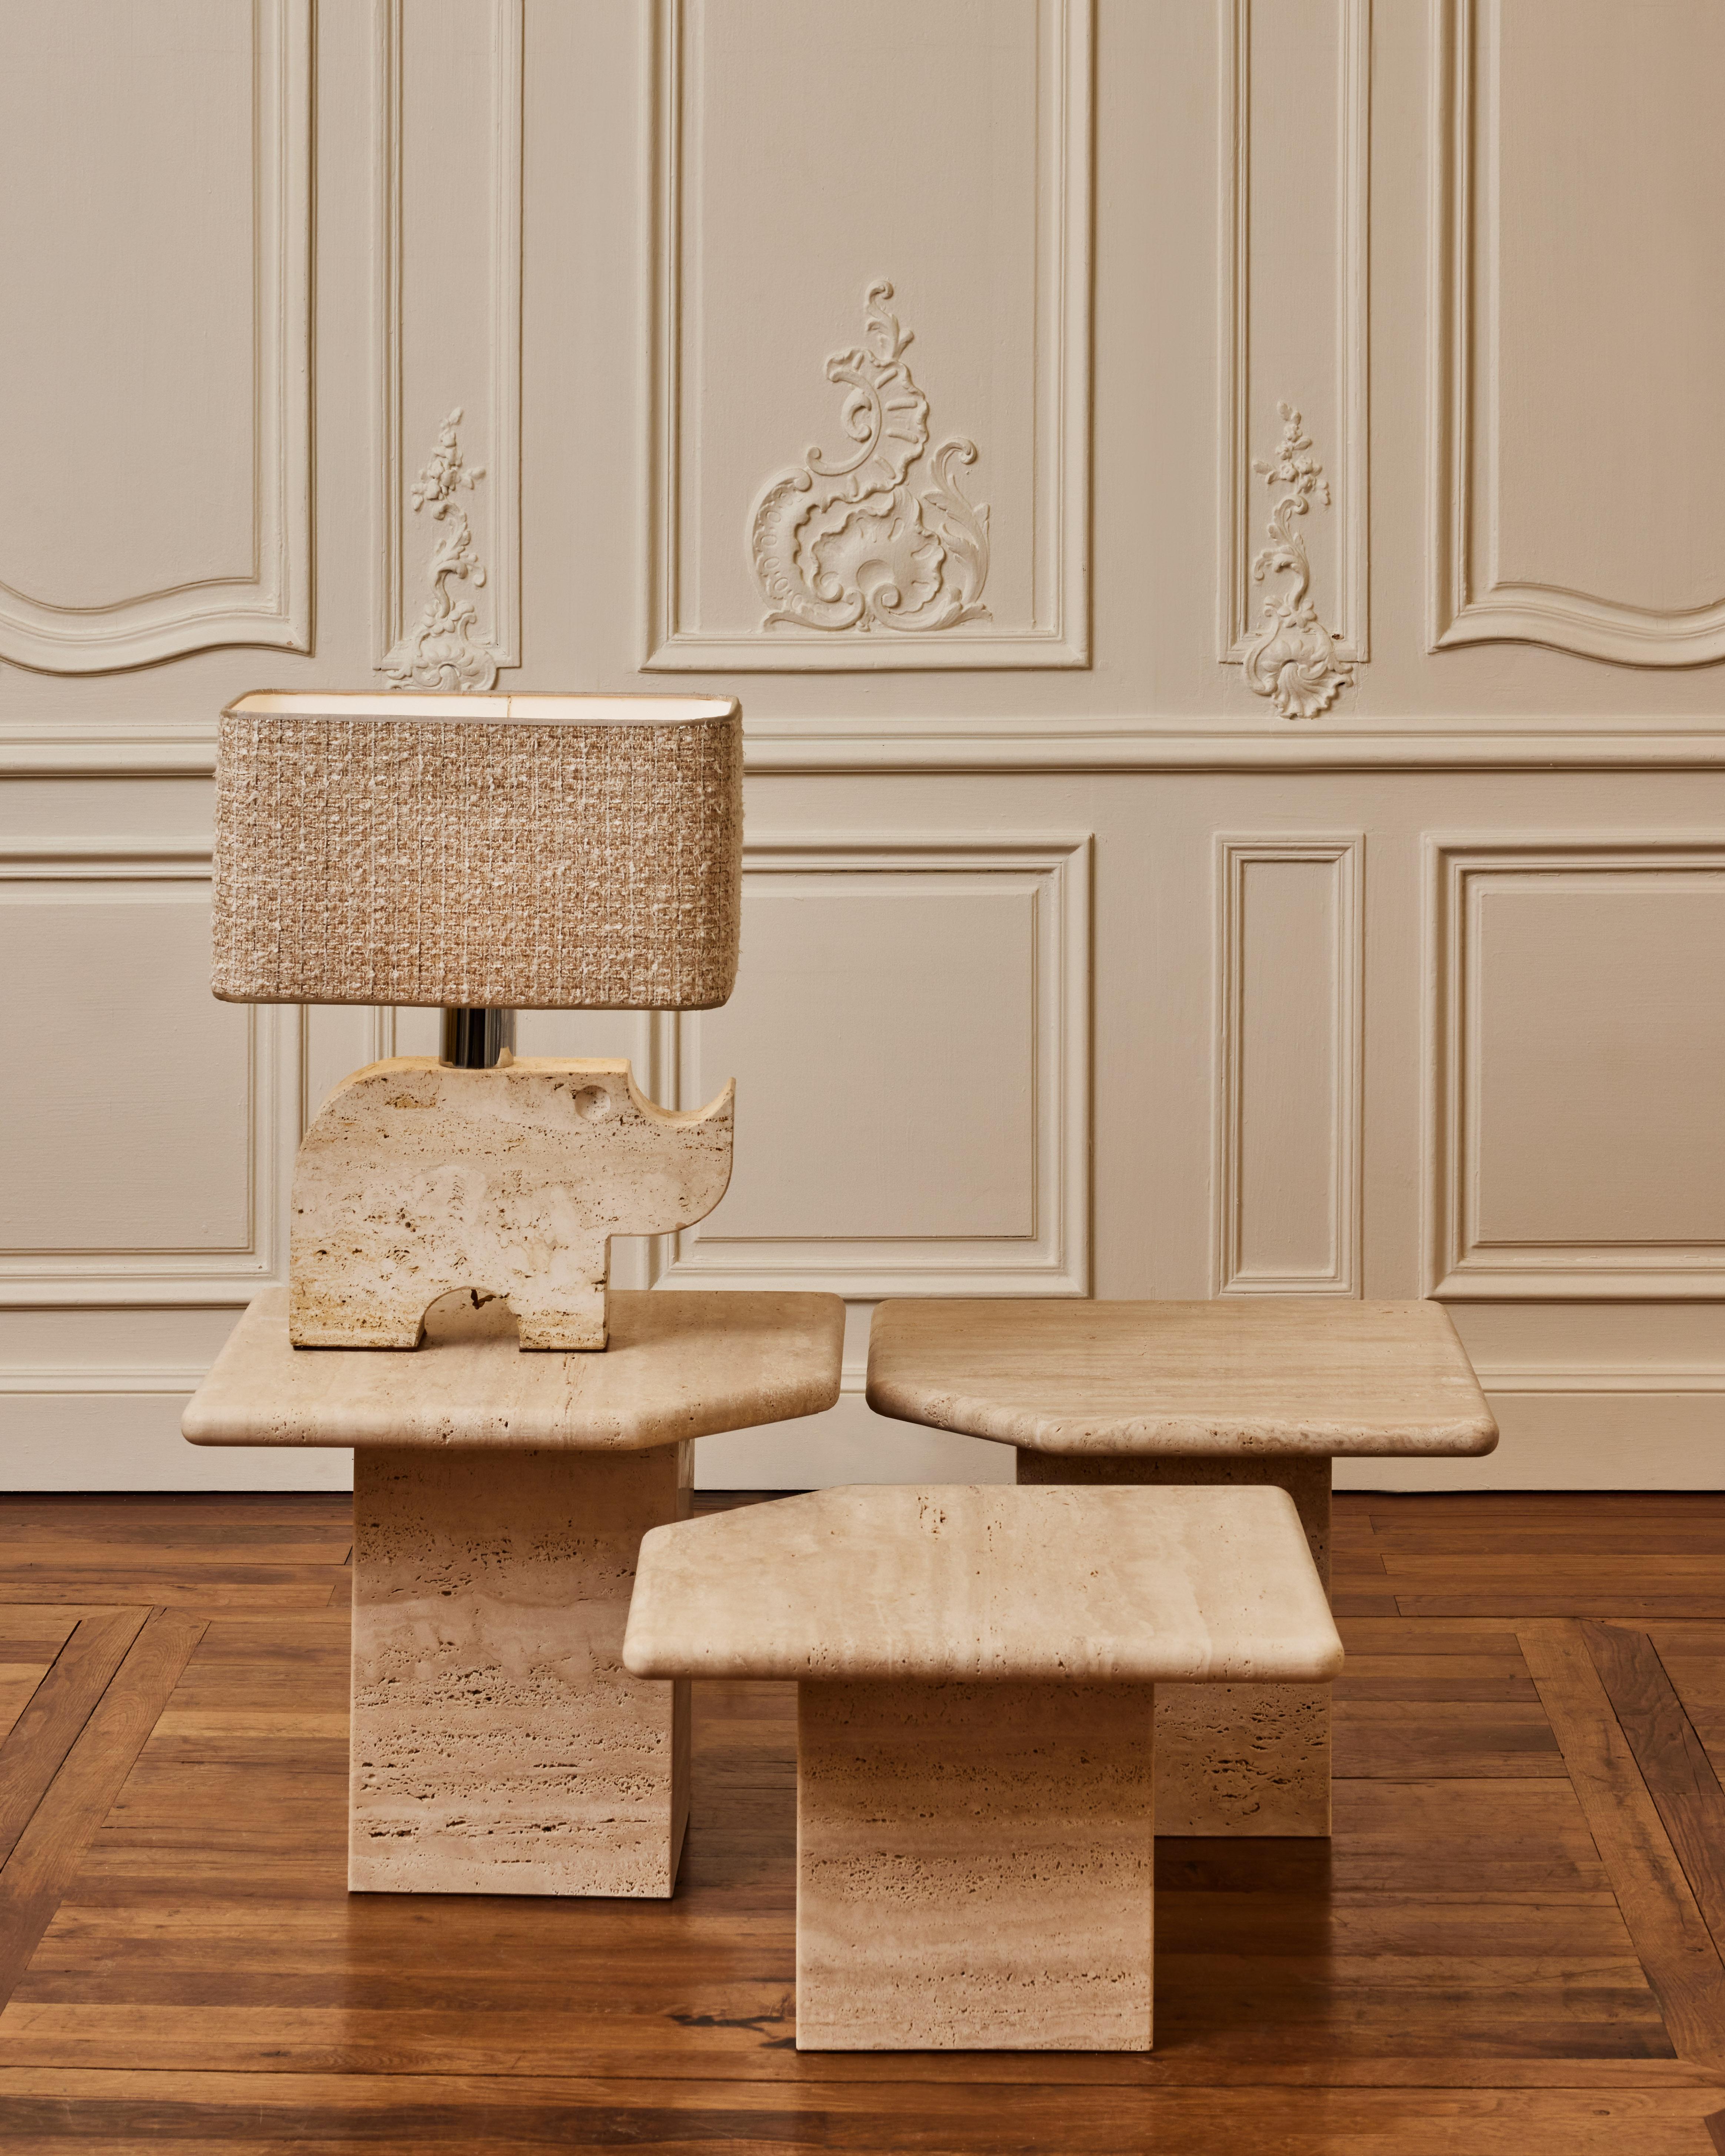 Set of 3 coffee tables in travertine stone by Studio Glustin.

Dimensions:
- 50 x 50 x H 40 cm
- 50 x 50 x H 35 cm
- 50 x 50 x H 32 cm.